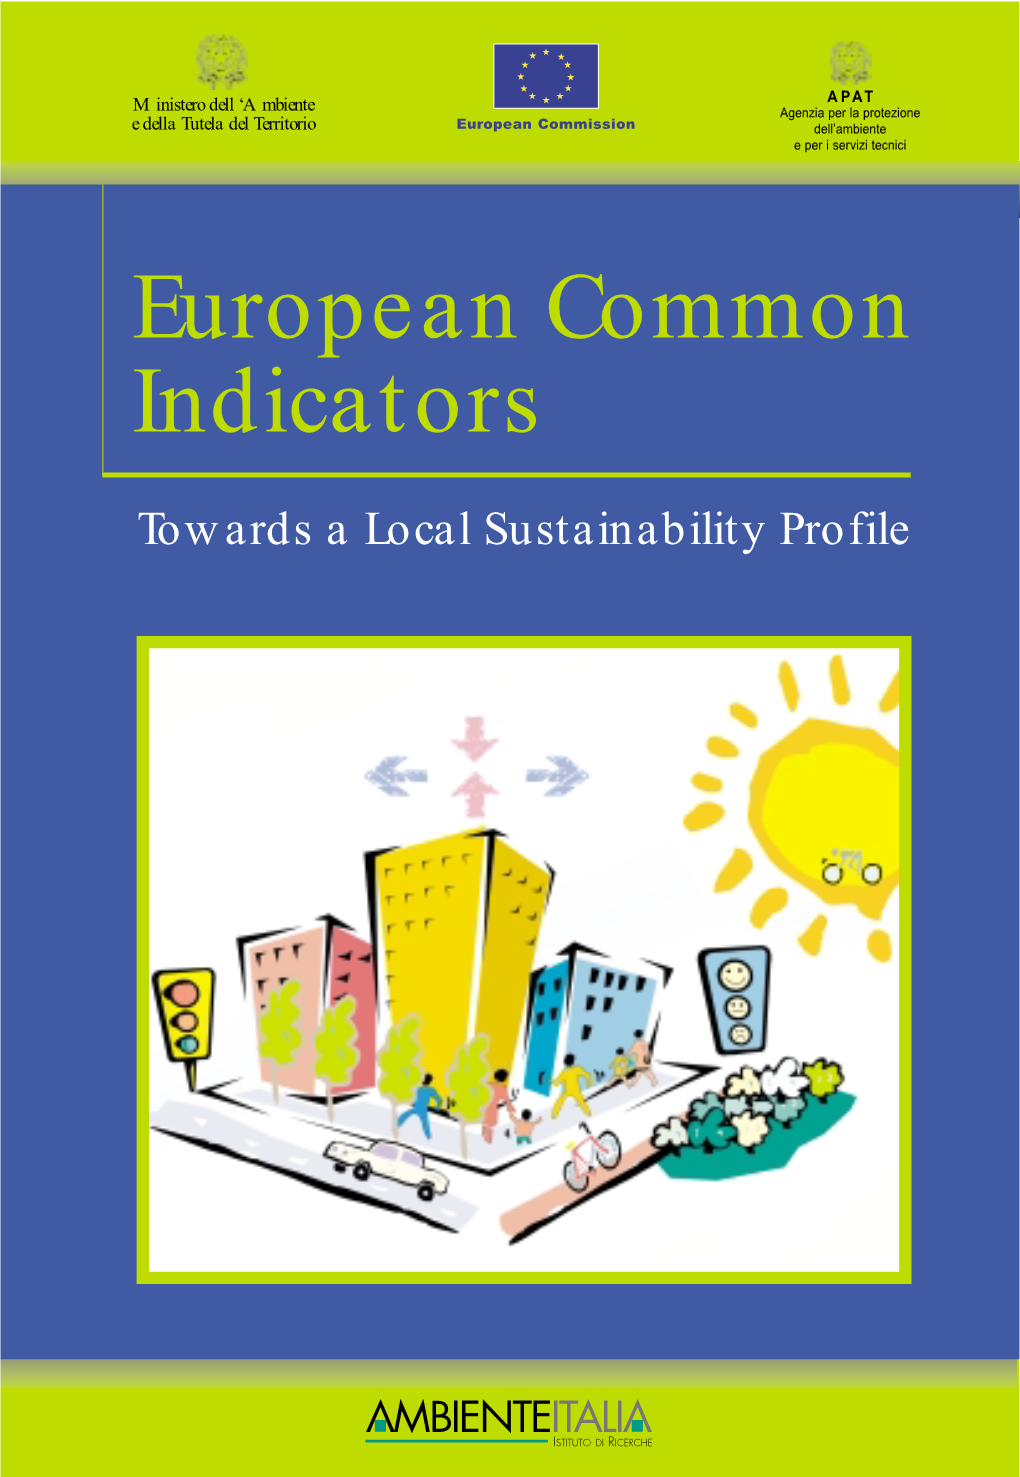 ECI Final Report Has Been Prepared by the ECI Ged by Ambiente Italia Research Institute